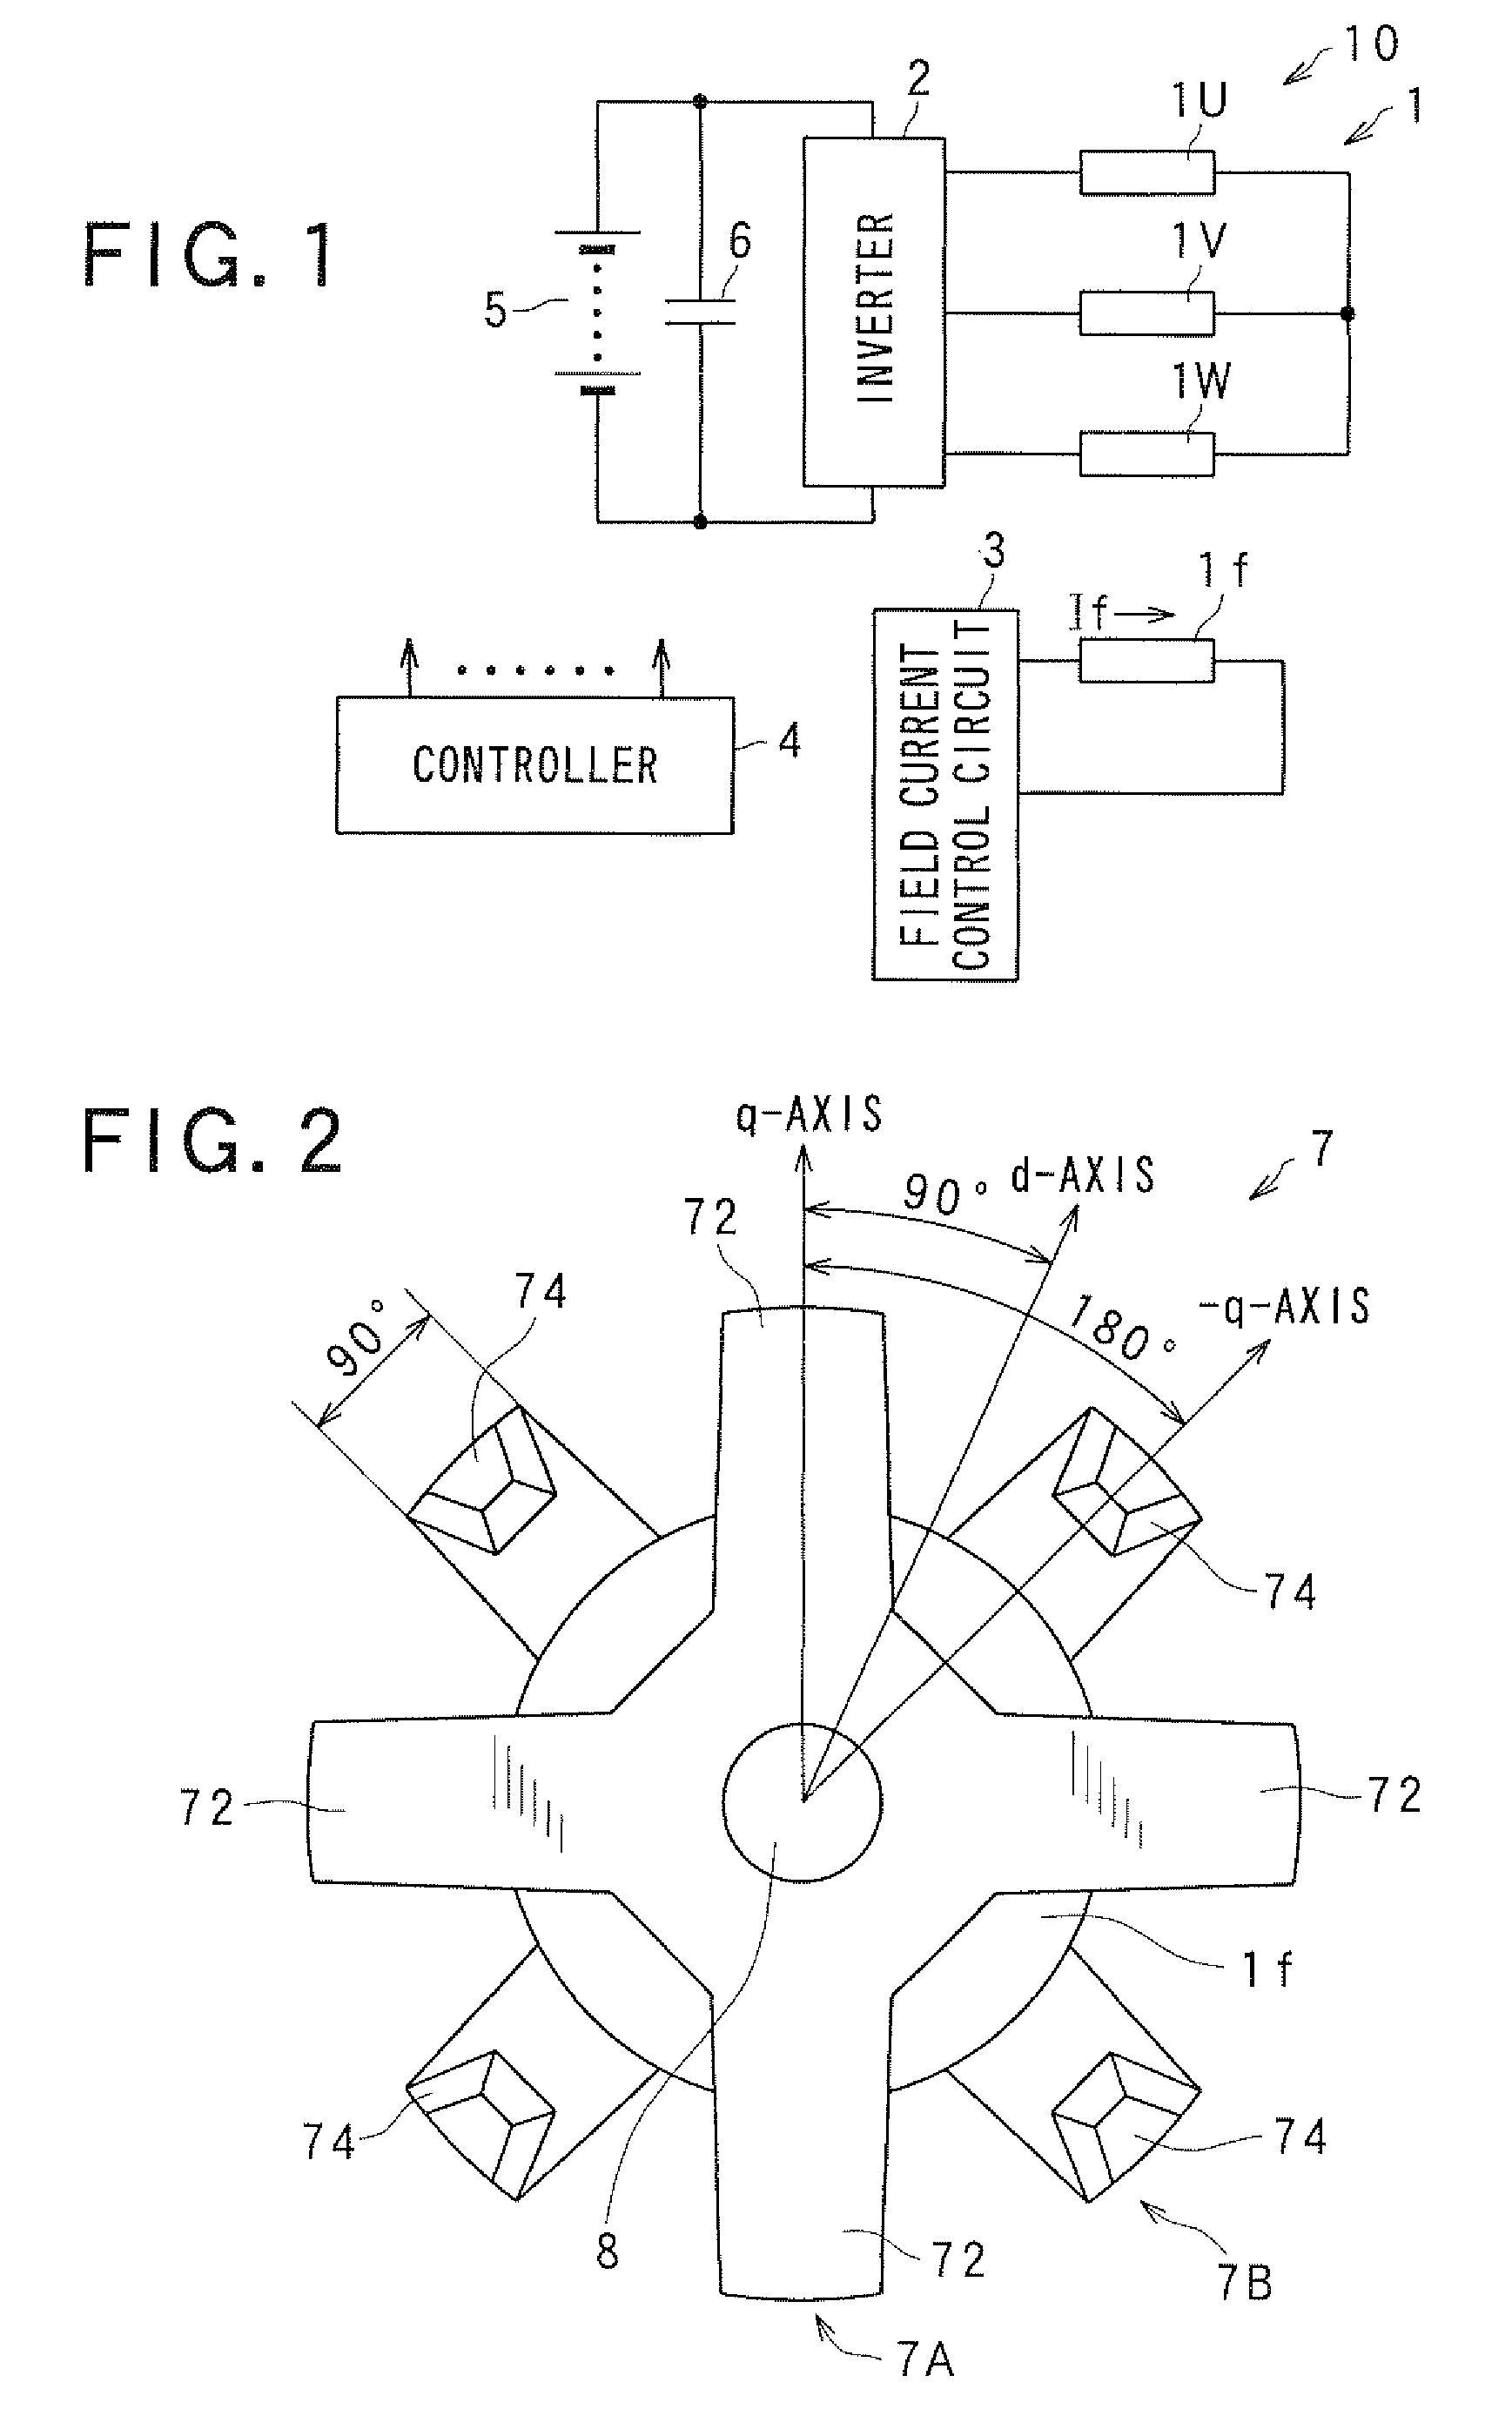 Motor apparatus including lundell motor having lundell-type rotor